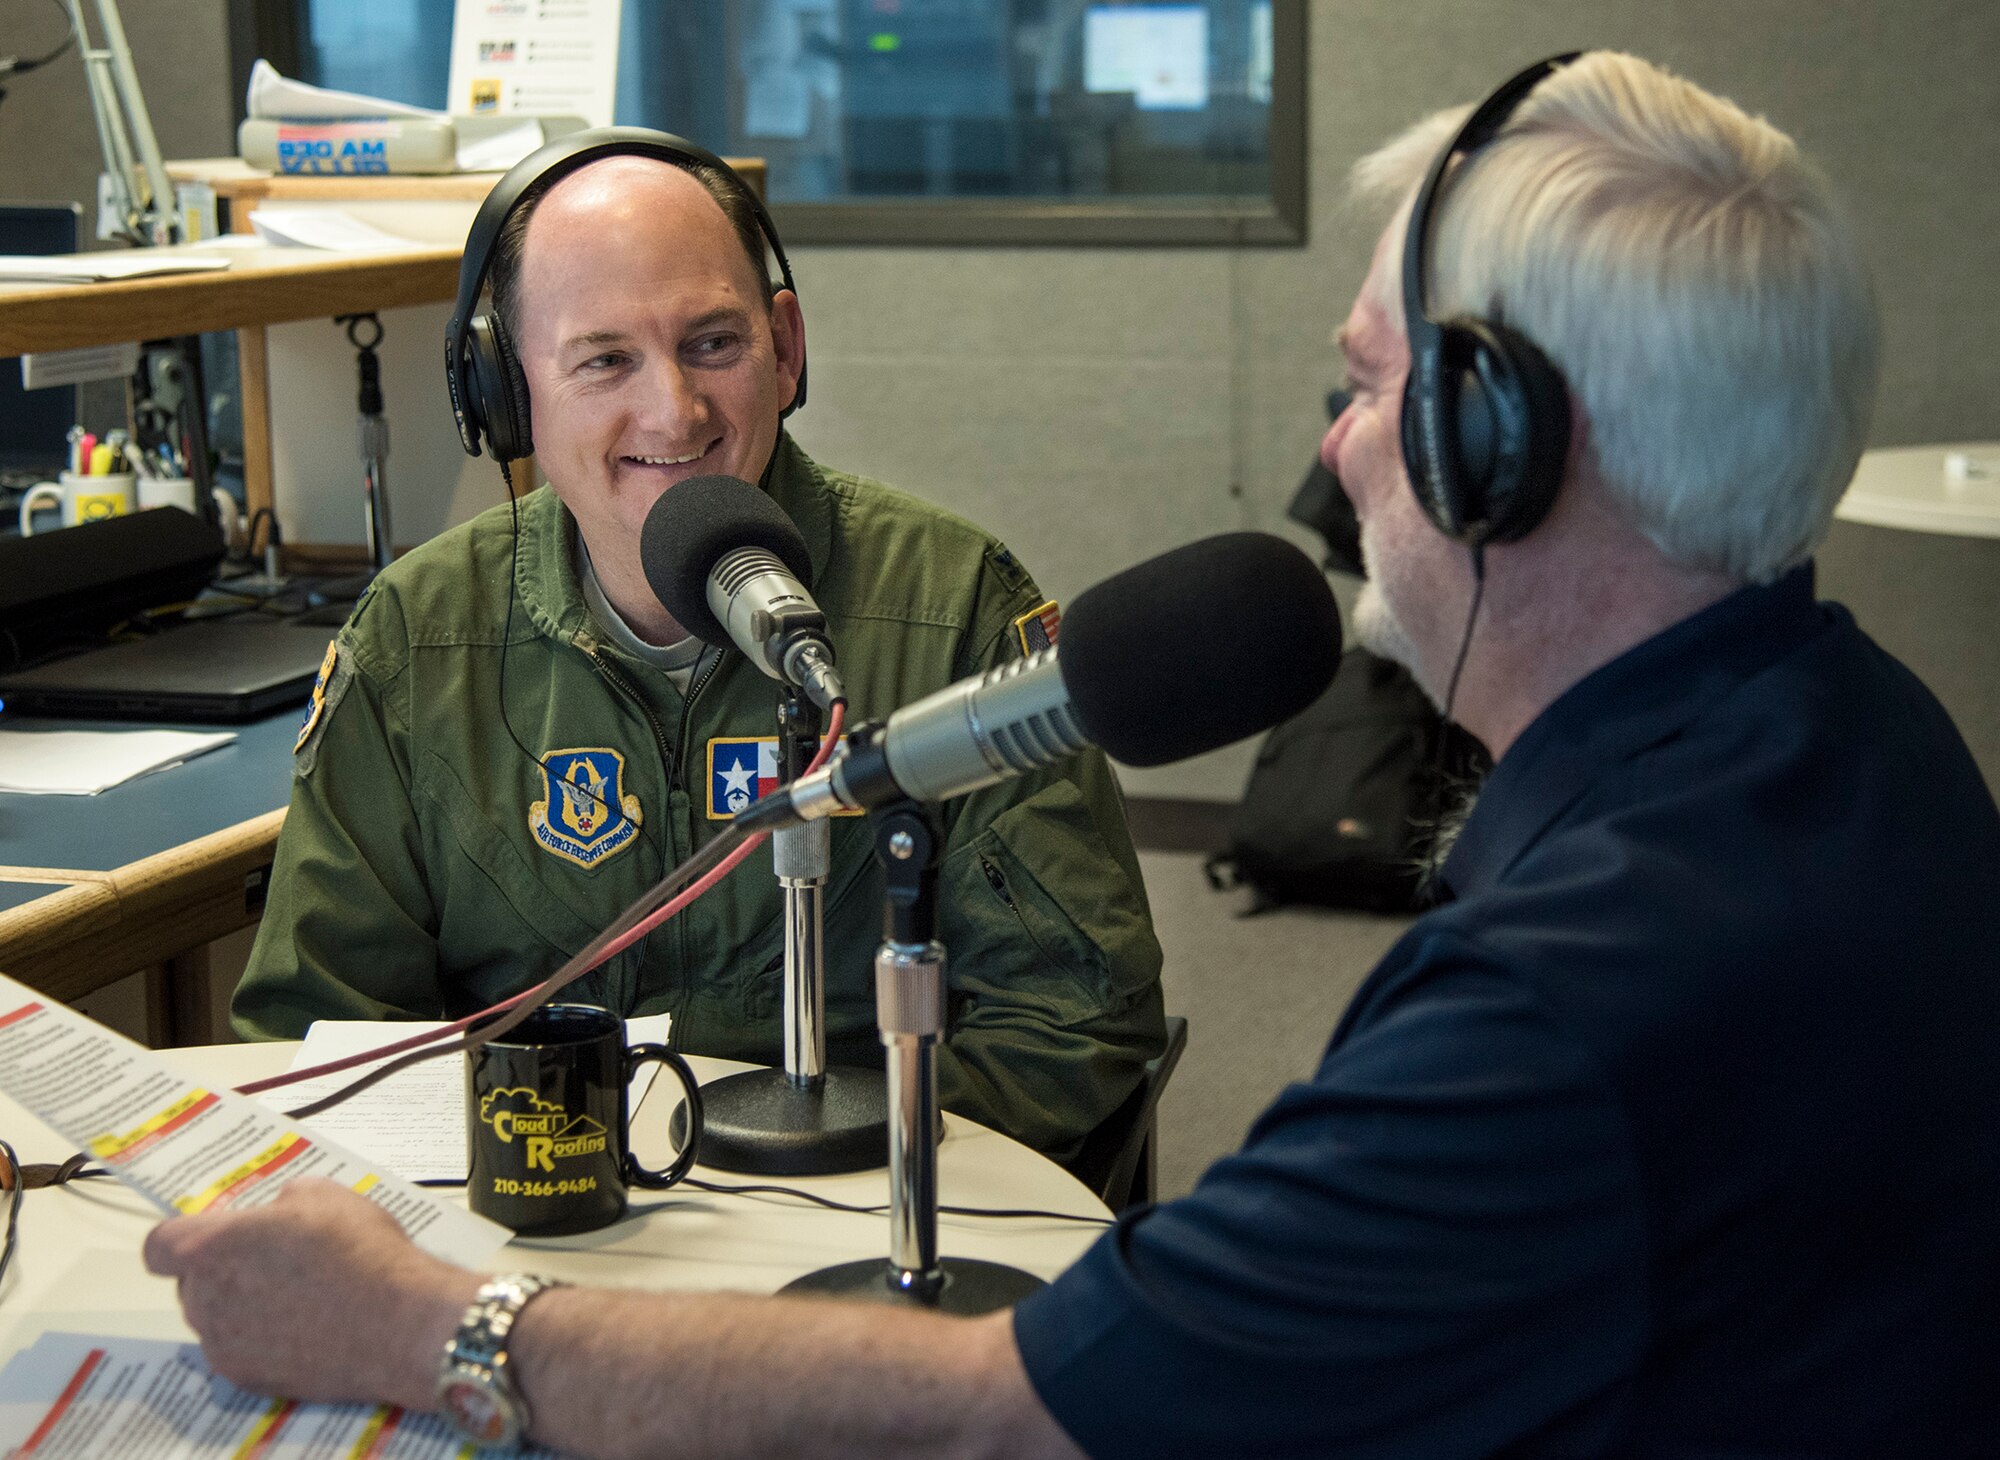 Col. Thomas K. Smith, Jr., 433rd Airlift Wing commander, responds to an interview question by Mark Frye on the Military USA Radio show Jan. 28, 2016 at Salem Communications San Antonio, Texas. The show runs every Saturday from 8 to 9 a.m. and seeks to inform and educate listeners about the importance of the more than 200 military missions in the Alamo city.   (U.S. Air Force photo by Benjamin Faske)